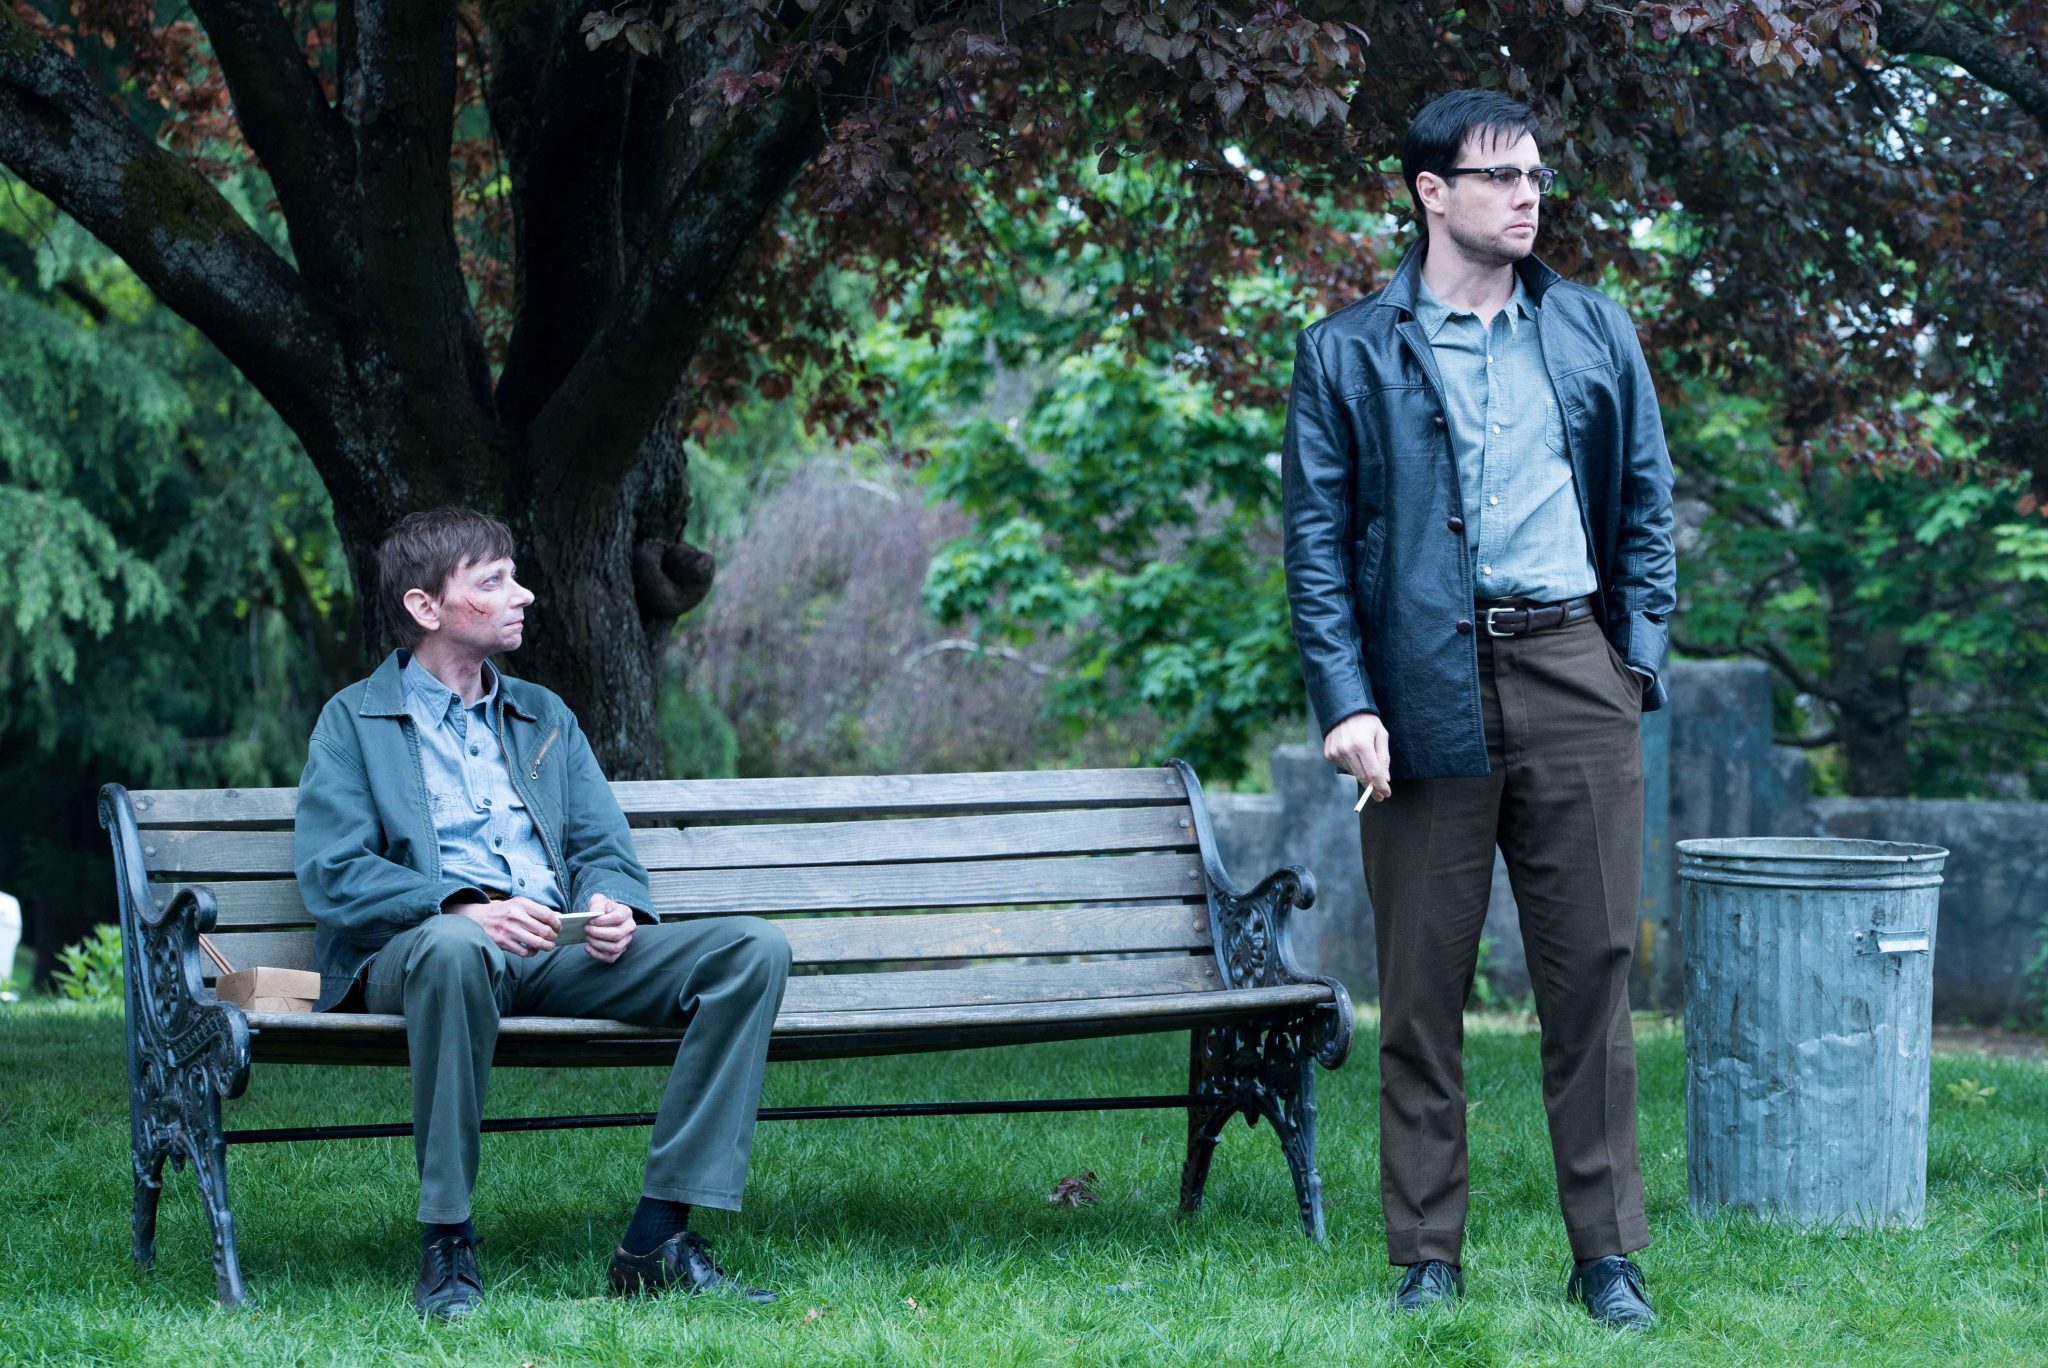 (l-r) DJ Qualls as Ed McCarthy & Rupert Evans as Frank Frink in The Man in the High Castle: Season 2. Photo Credit: Amazon Prime Video/Liane Hentscher